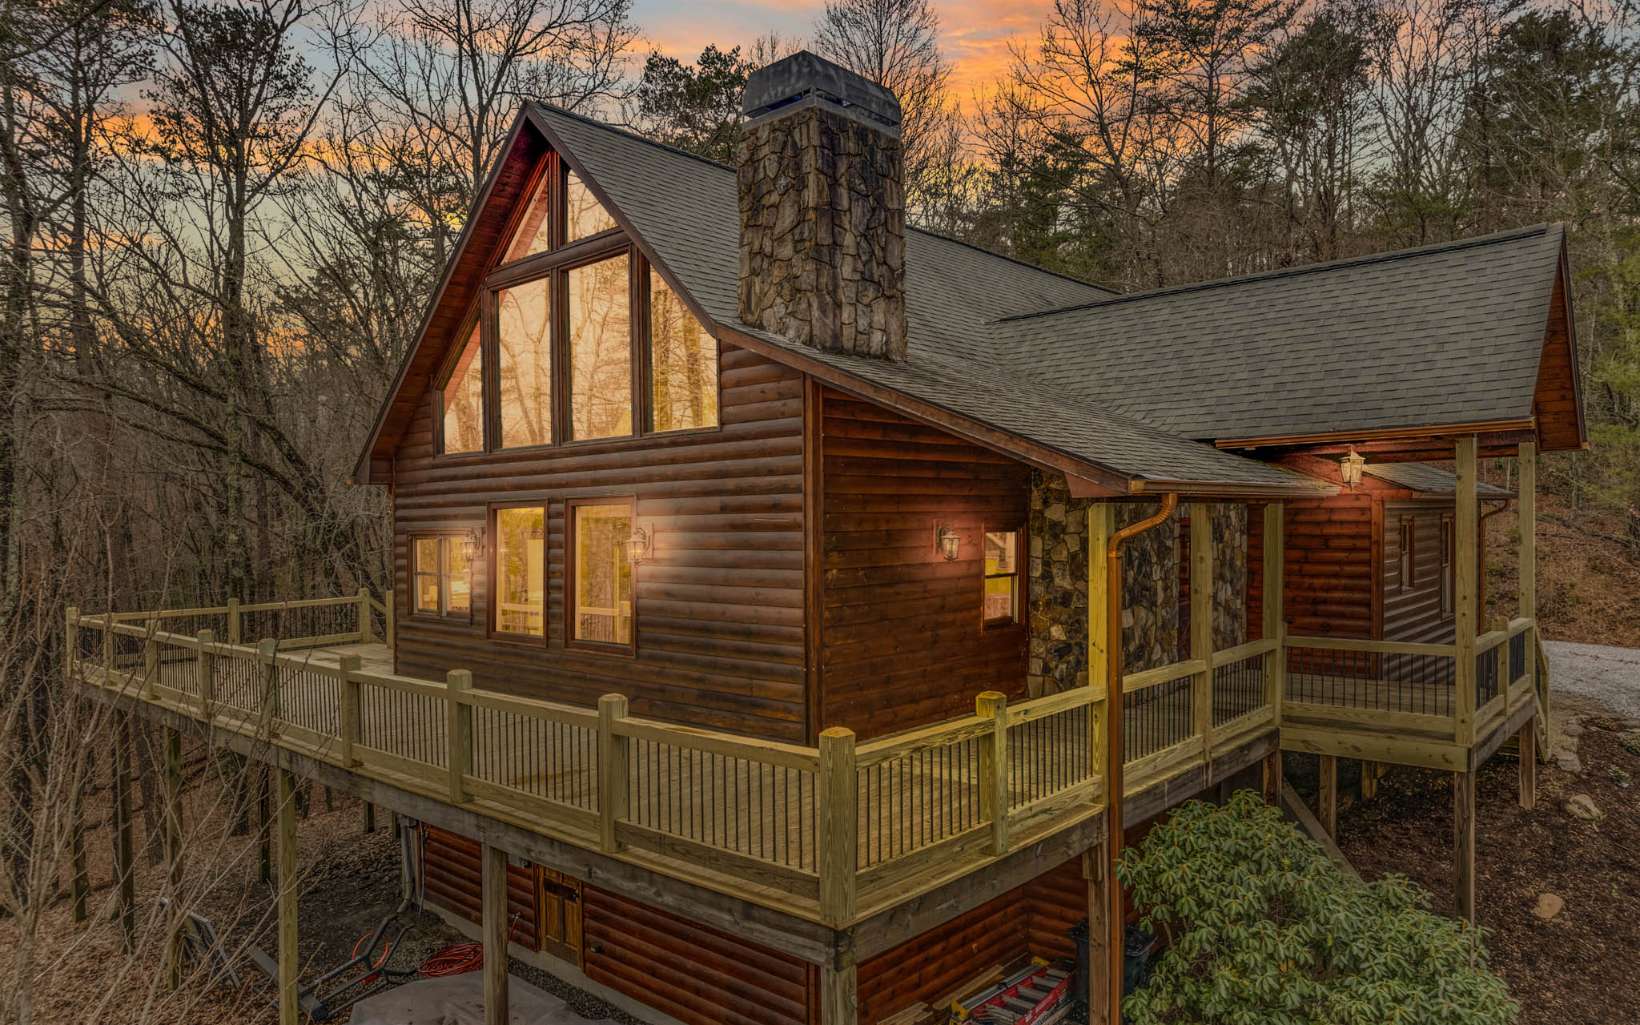 Enjoy the beauty of living in the mountains with the convenience of being moments from town. This lodge style cabin is within city limits of the quaint adventure town of Blue Ridge, Forbes magazine labeled top 5 American Destinations. A beautiful, spacious, and custom-built log cabin, This 4-bedroom home features a private 2+ acre lot, seasonal mountain view, a large exterior deck, an open concept, large living room and dining with huge vaulted ceilings, masonry fireplace, gorgeous wood features, hardwood floors, upgrades throughout, master on the main, walk in closets, en suite bathroom, large open loft, game room, and more. This cabin would make a perfect full-time home with plenty of storage and privacy. It would also make a wonderful second home in the Appalachian Mountains. You will not be disappointed in this well maintained home and the careful attention to details, such as stunning whole log beams etc. See additional features list.